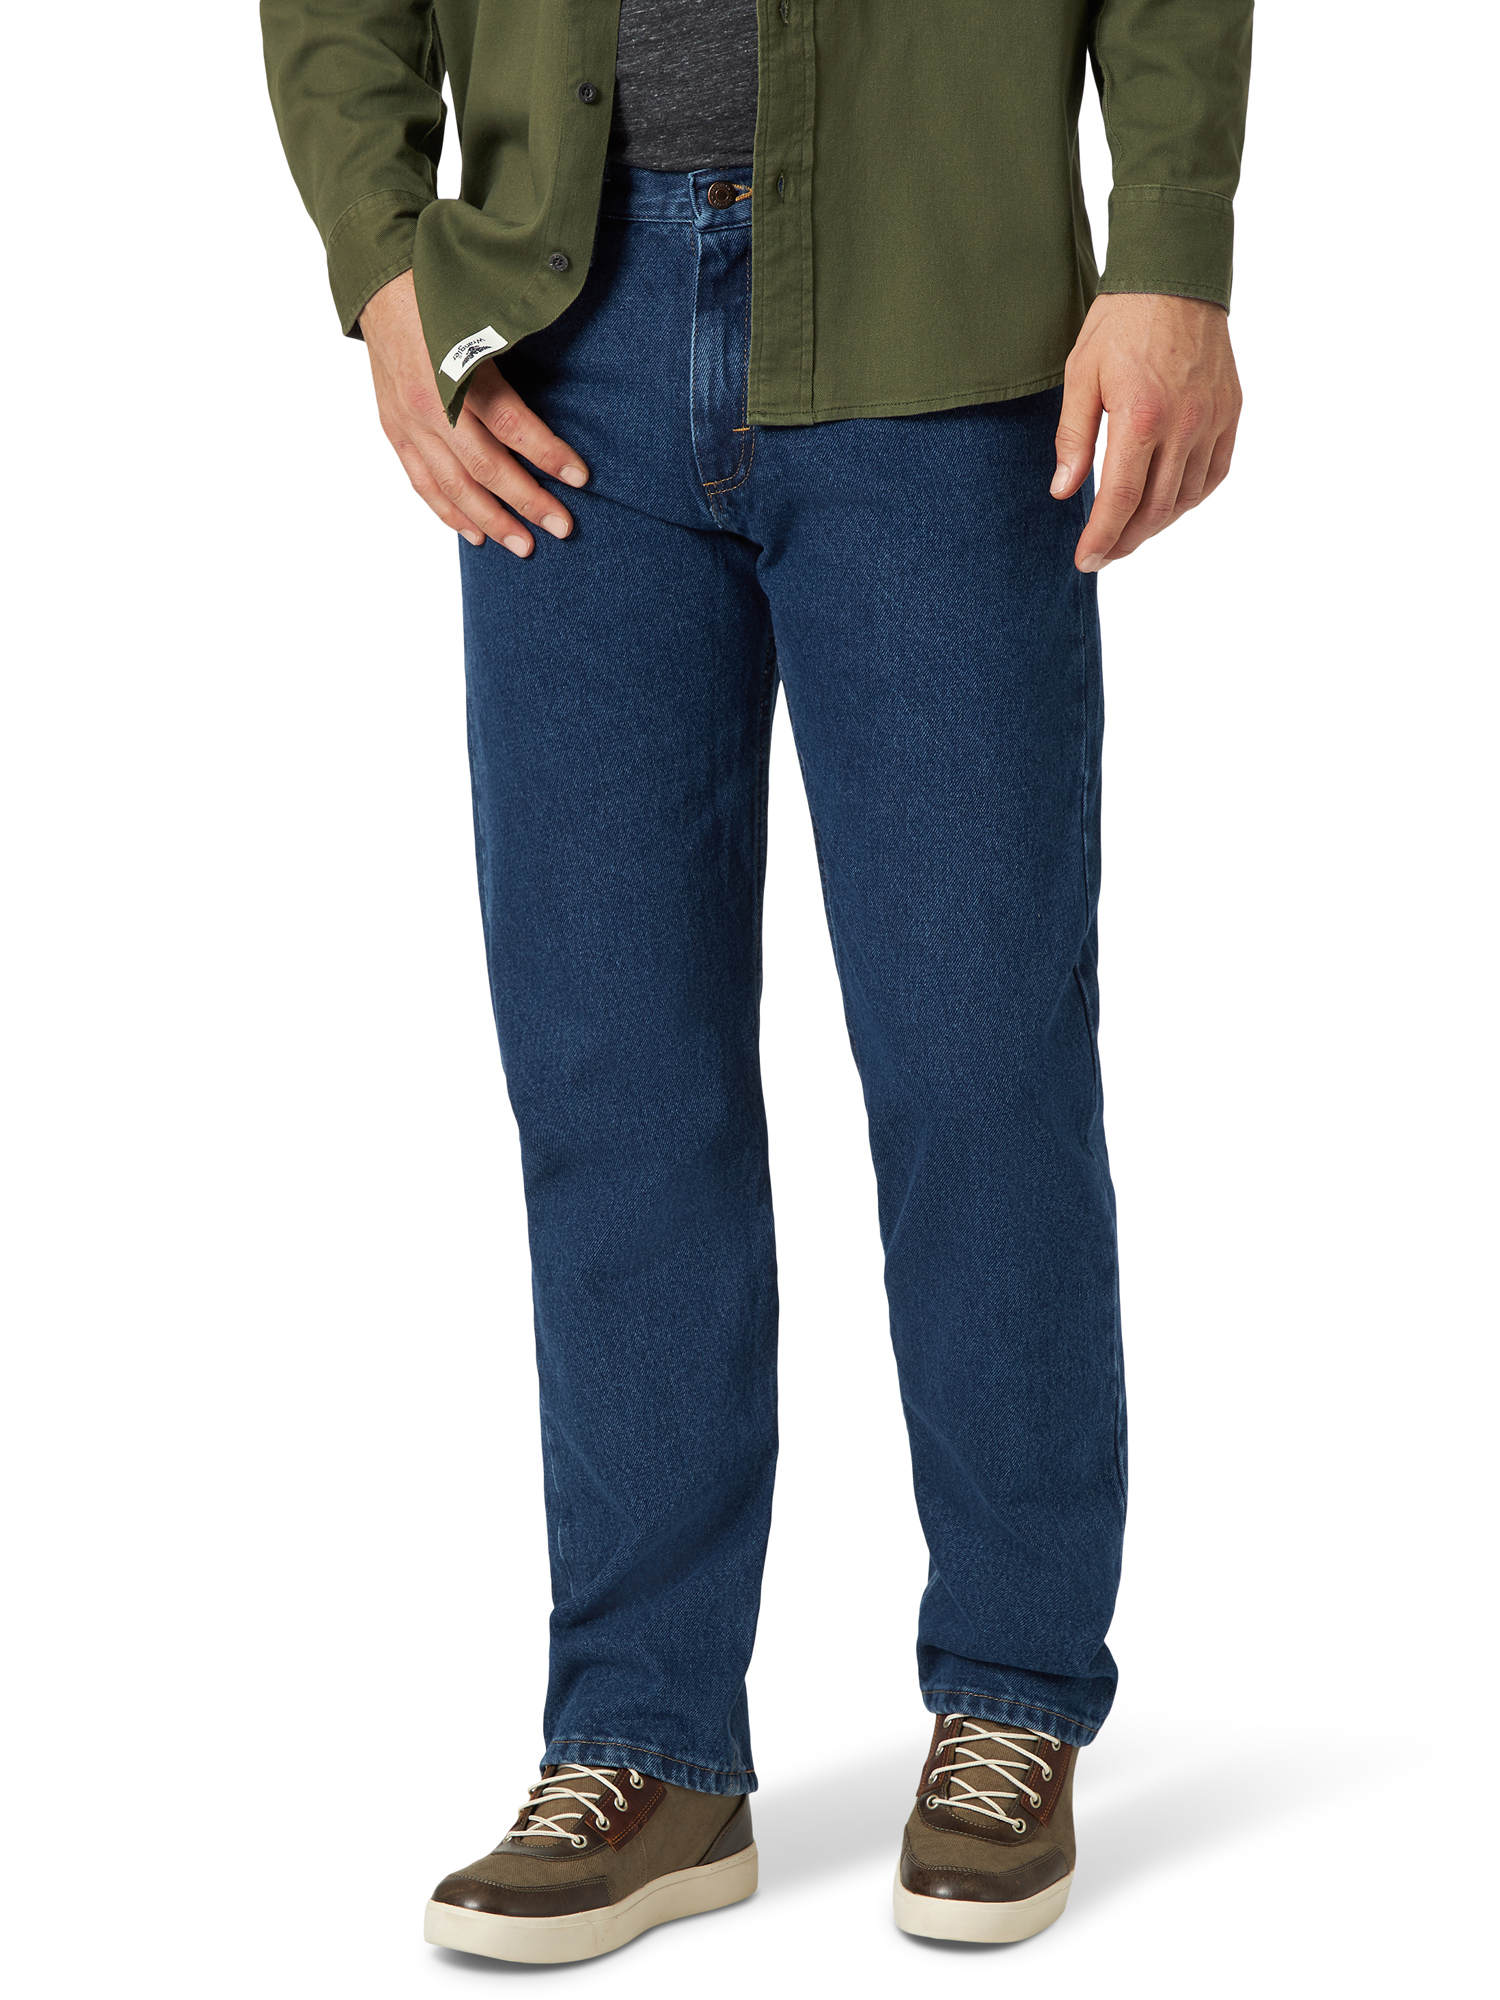 Wrangler Men's and Big Men's Relaxed Fit Jeans - image 1 of 4